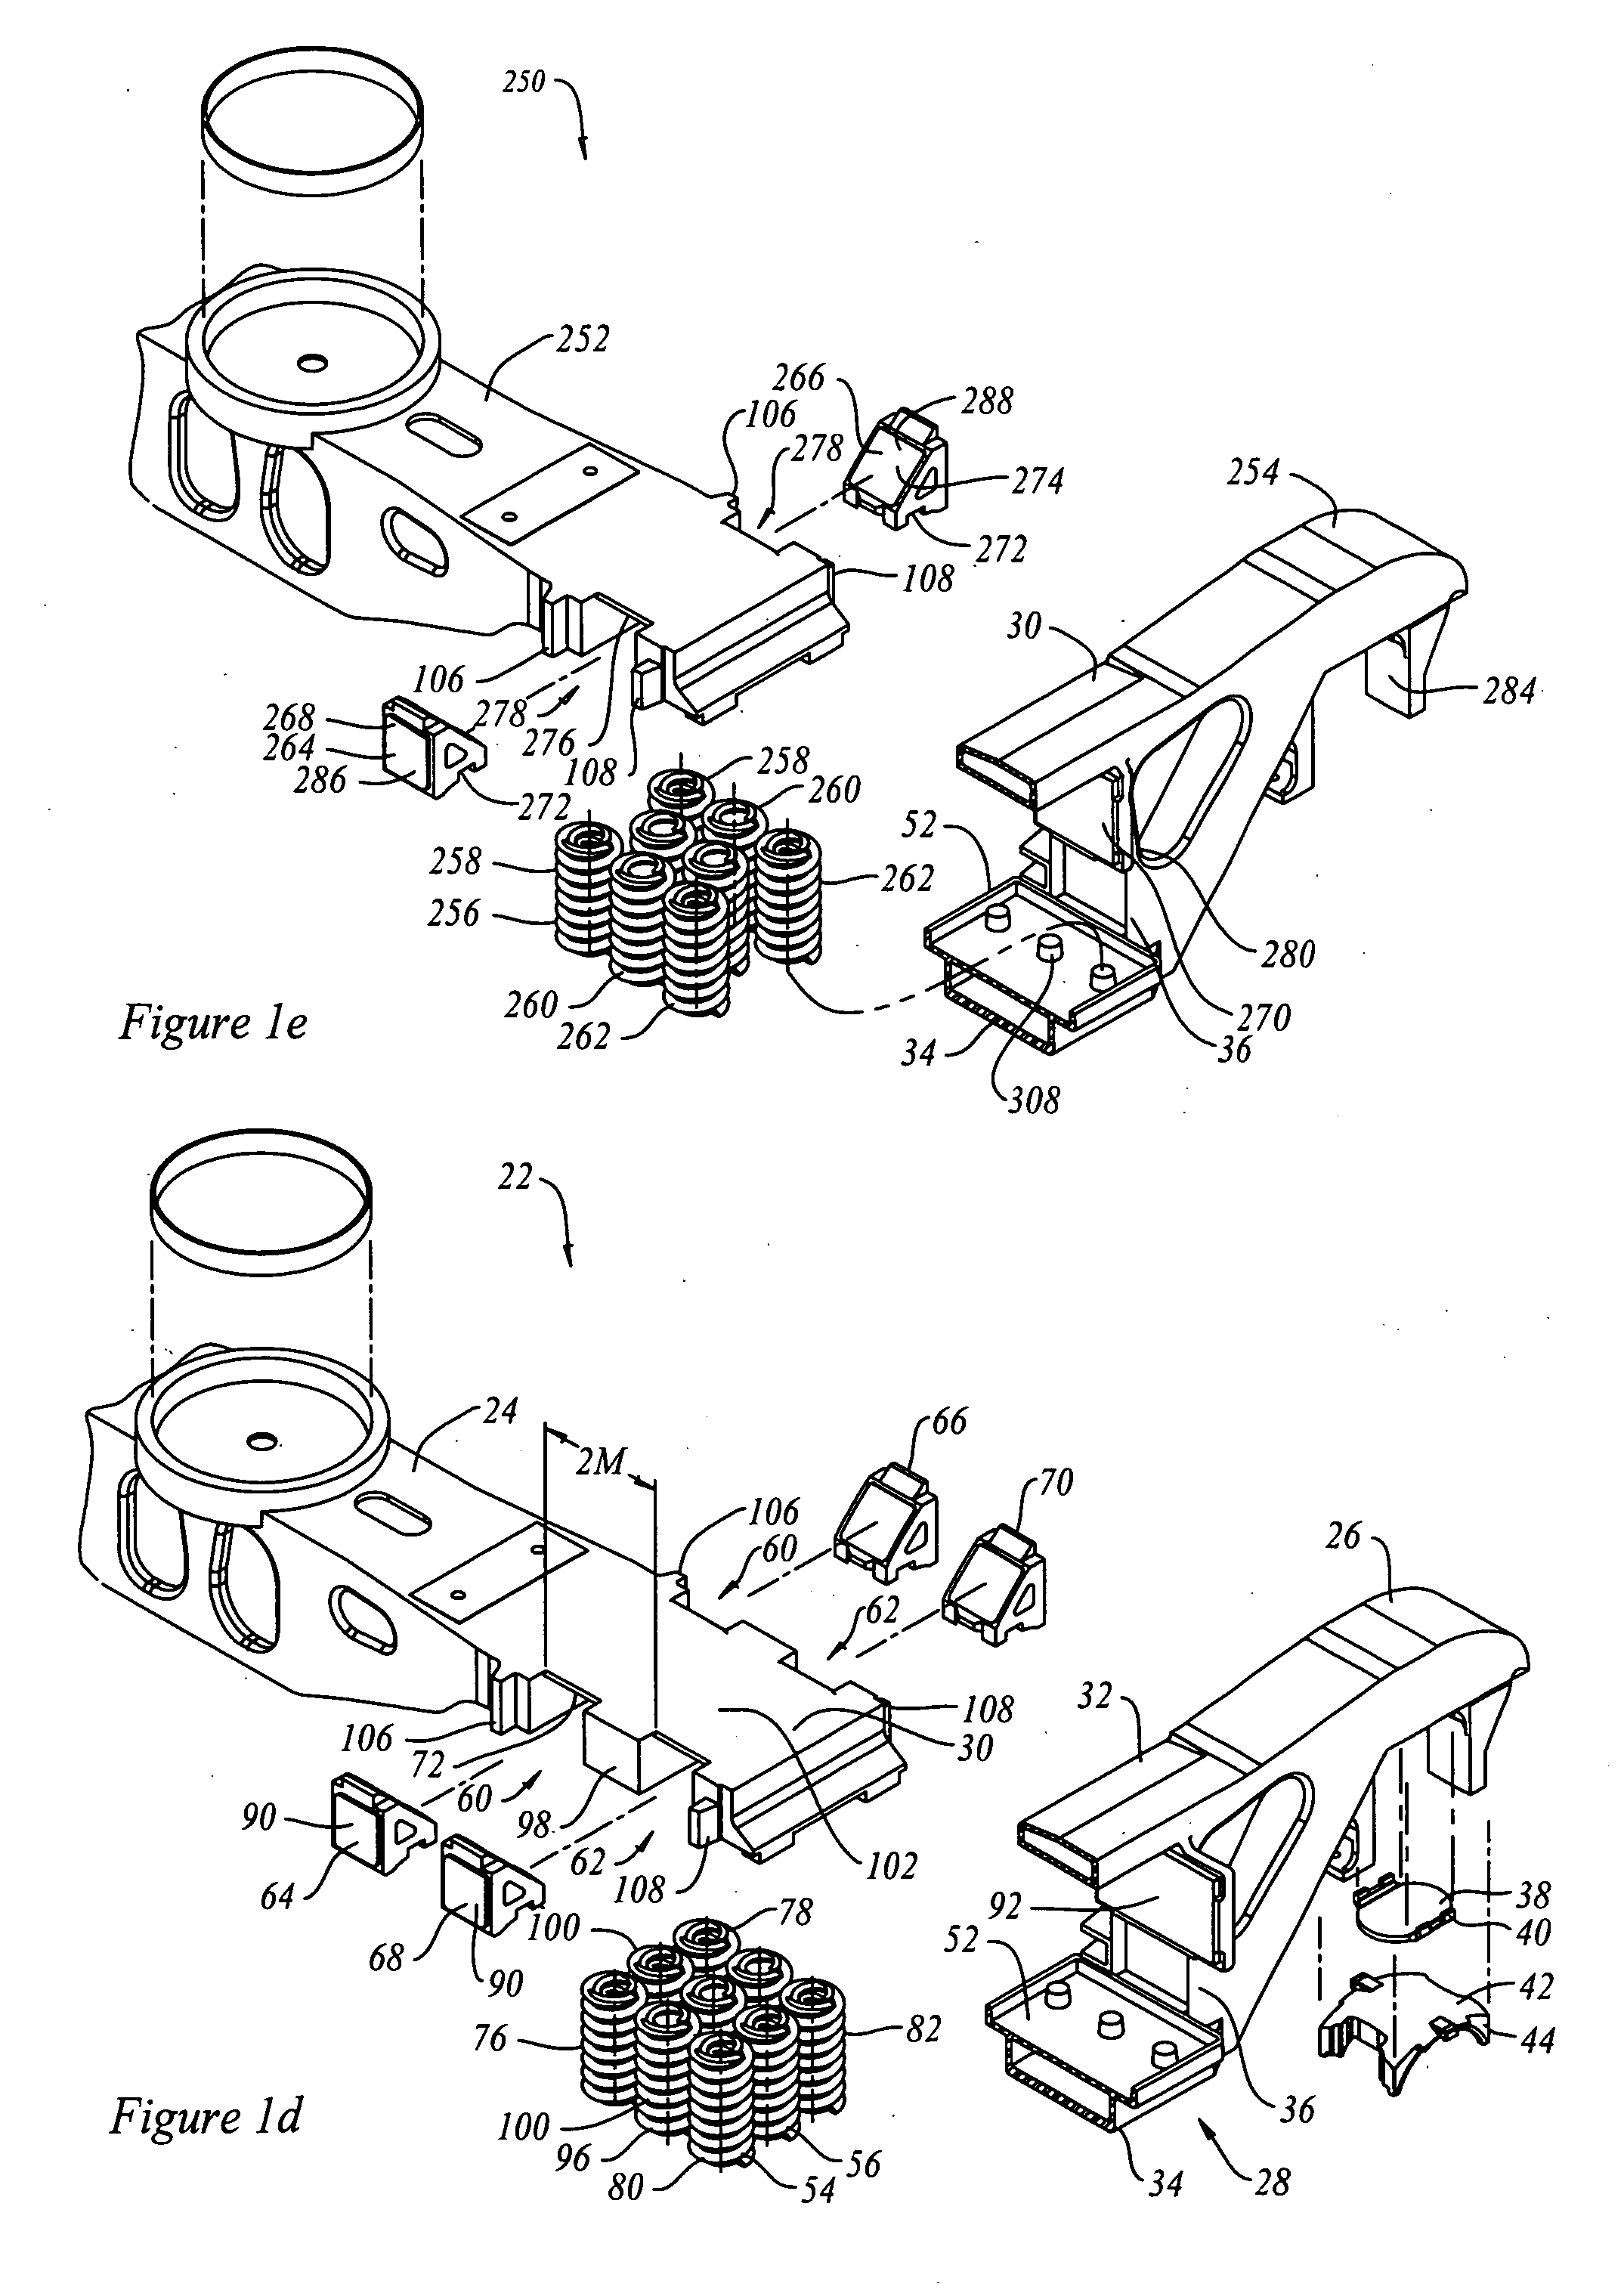 Rail road car truck and fittings therefor